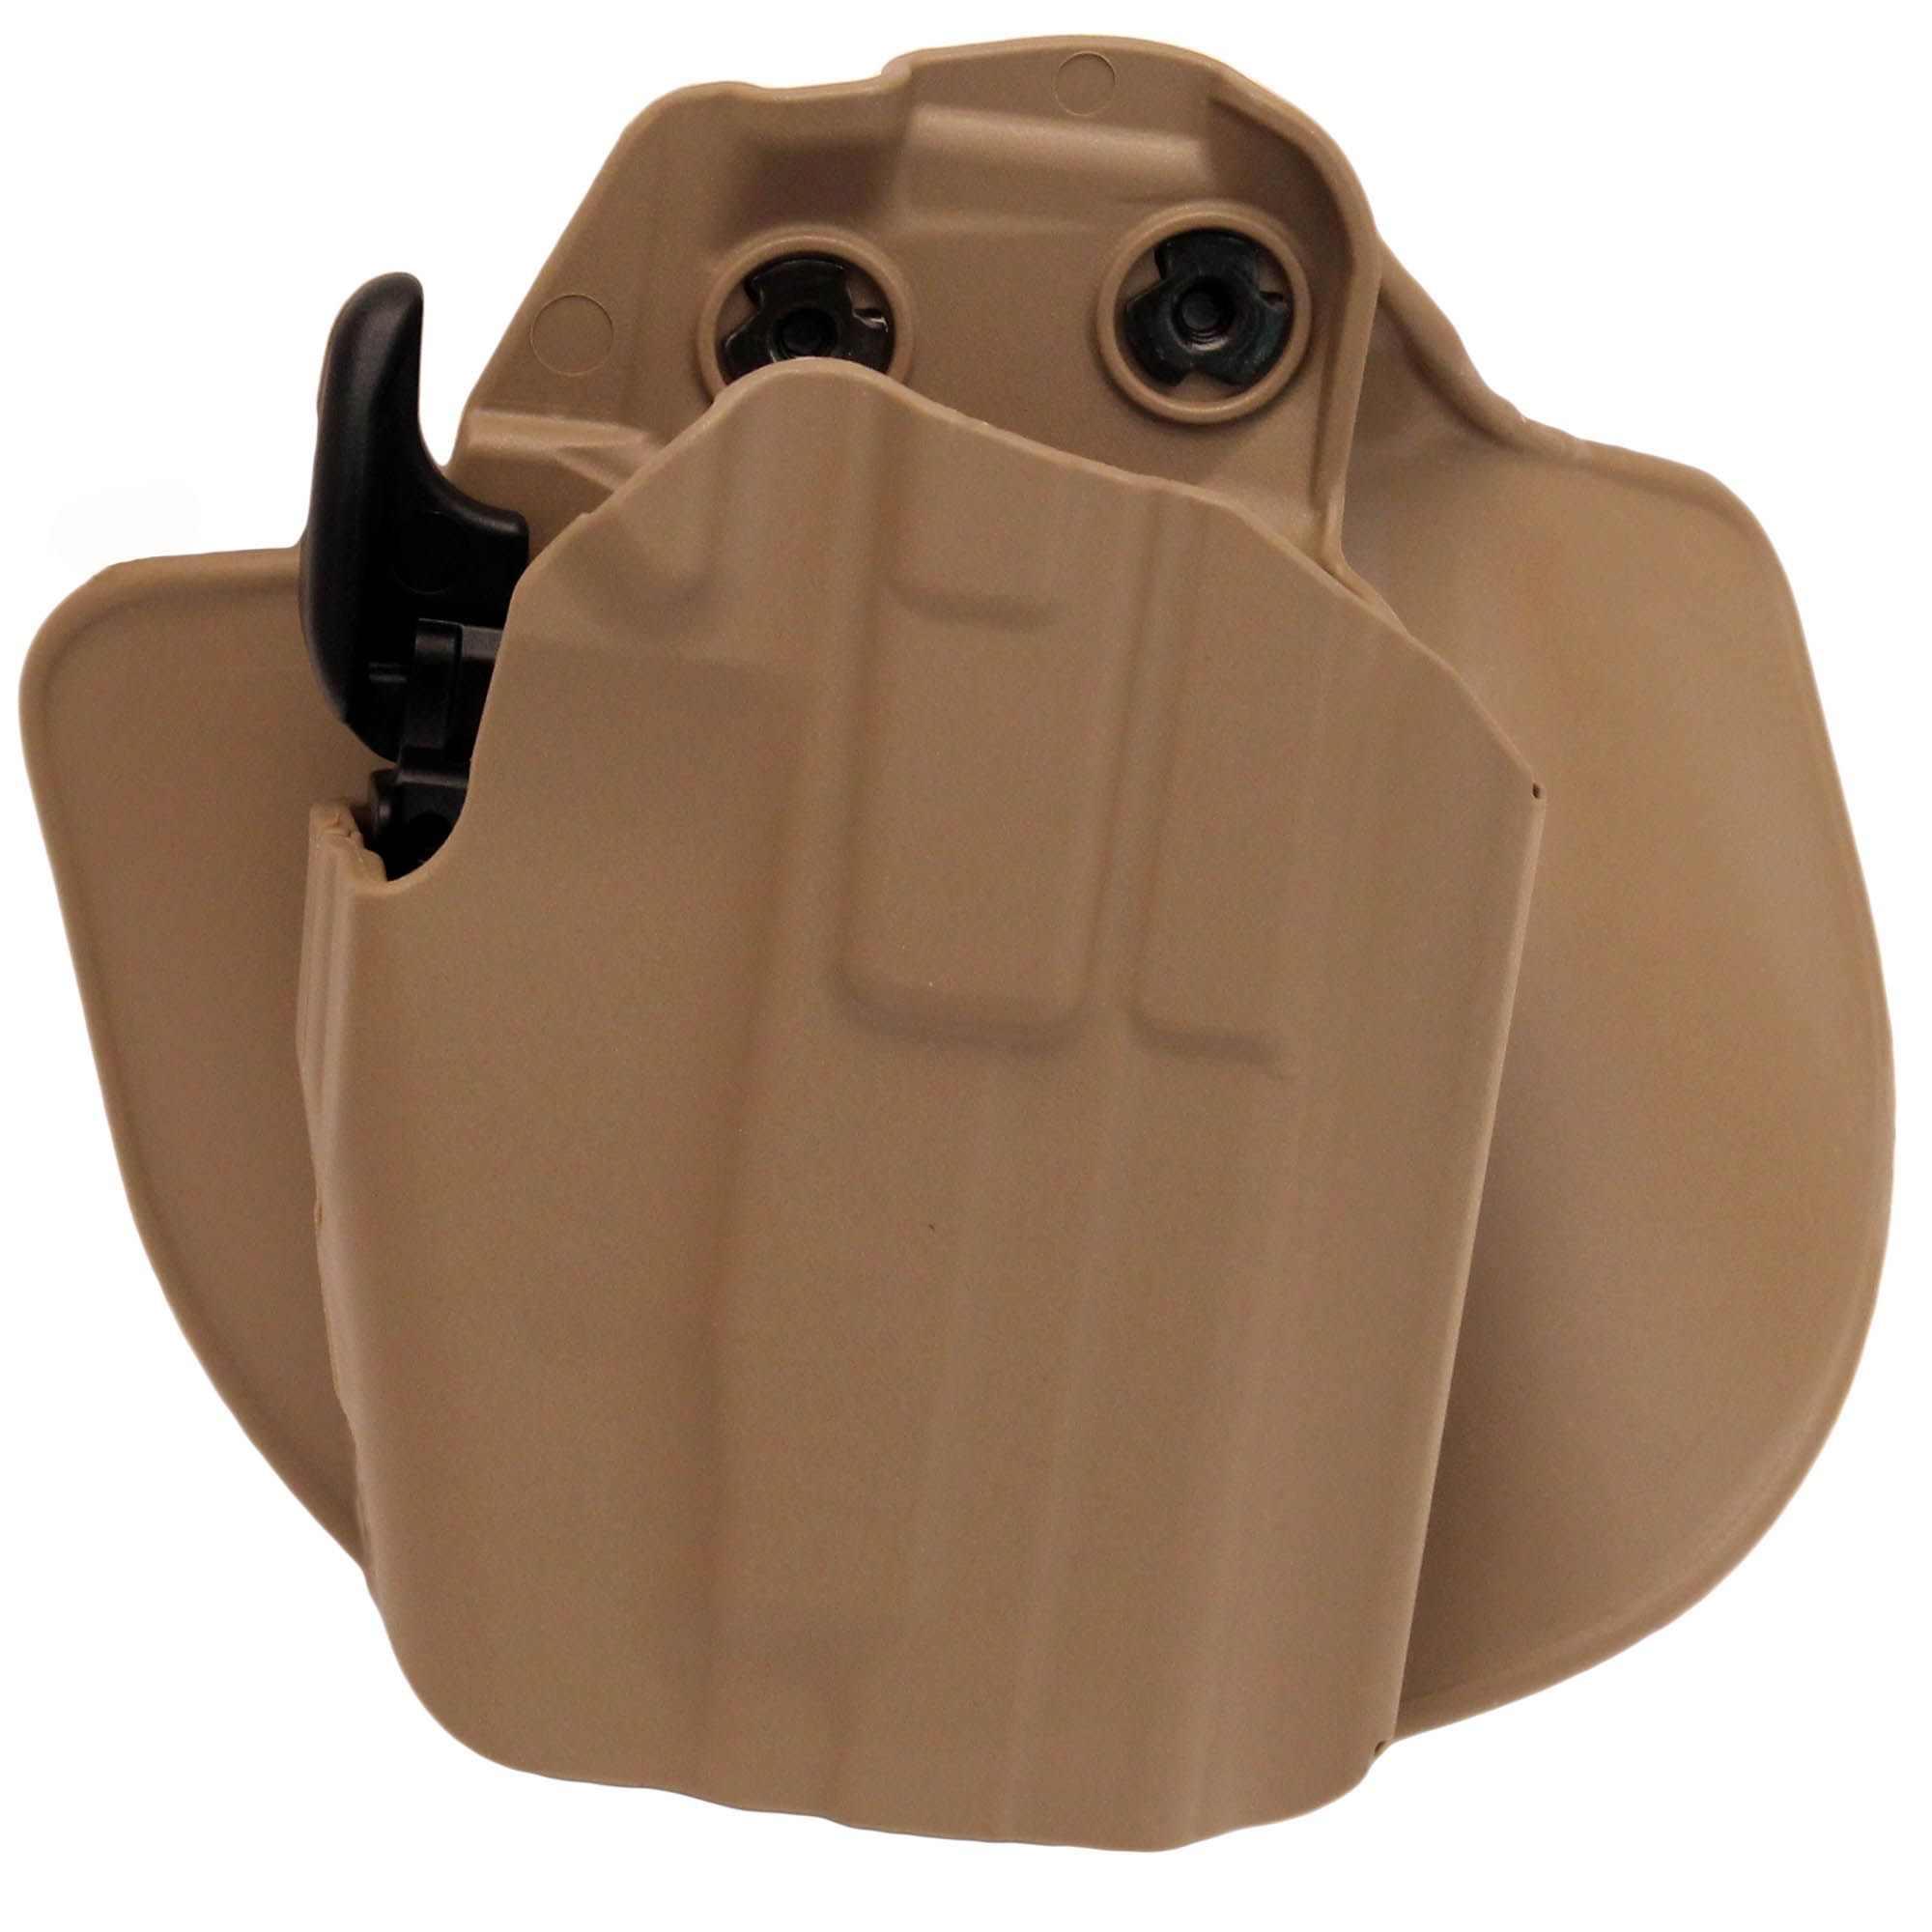 Safariland 578 Grip Lock System Pro-Fit Holster Right Hand Flat : 578-750-551